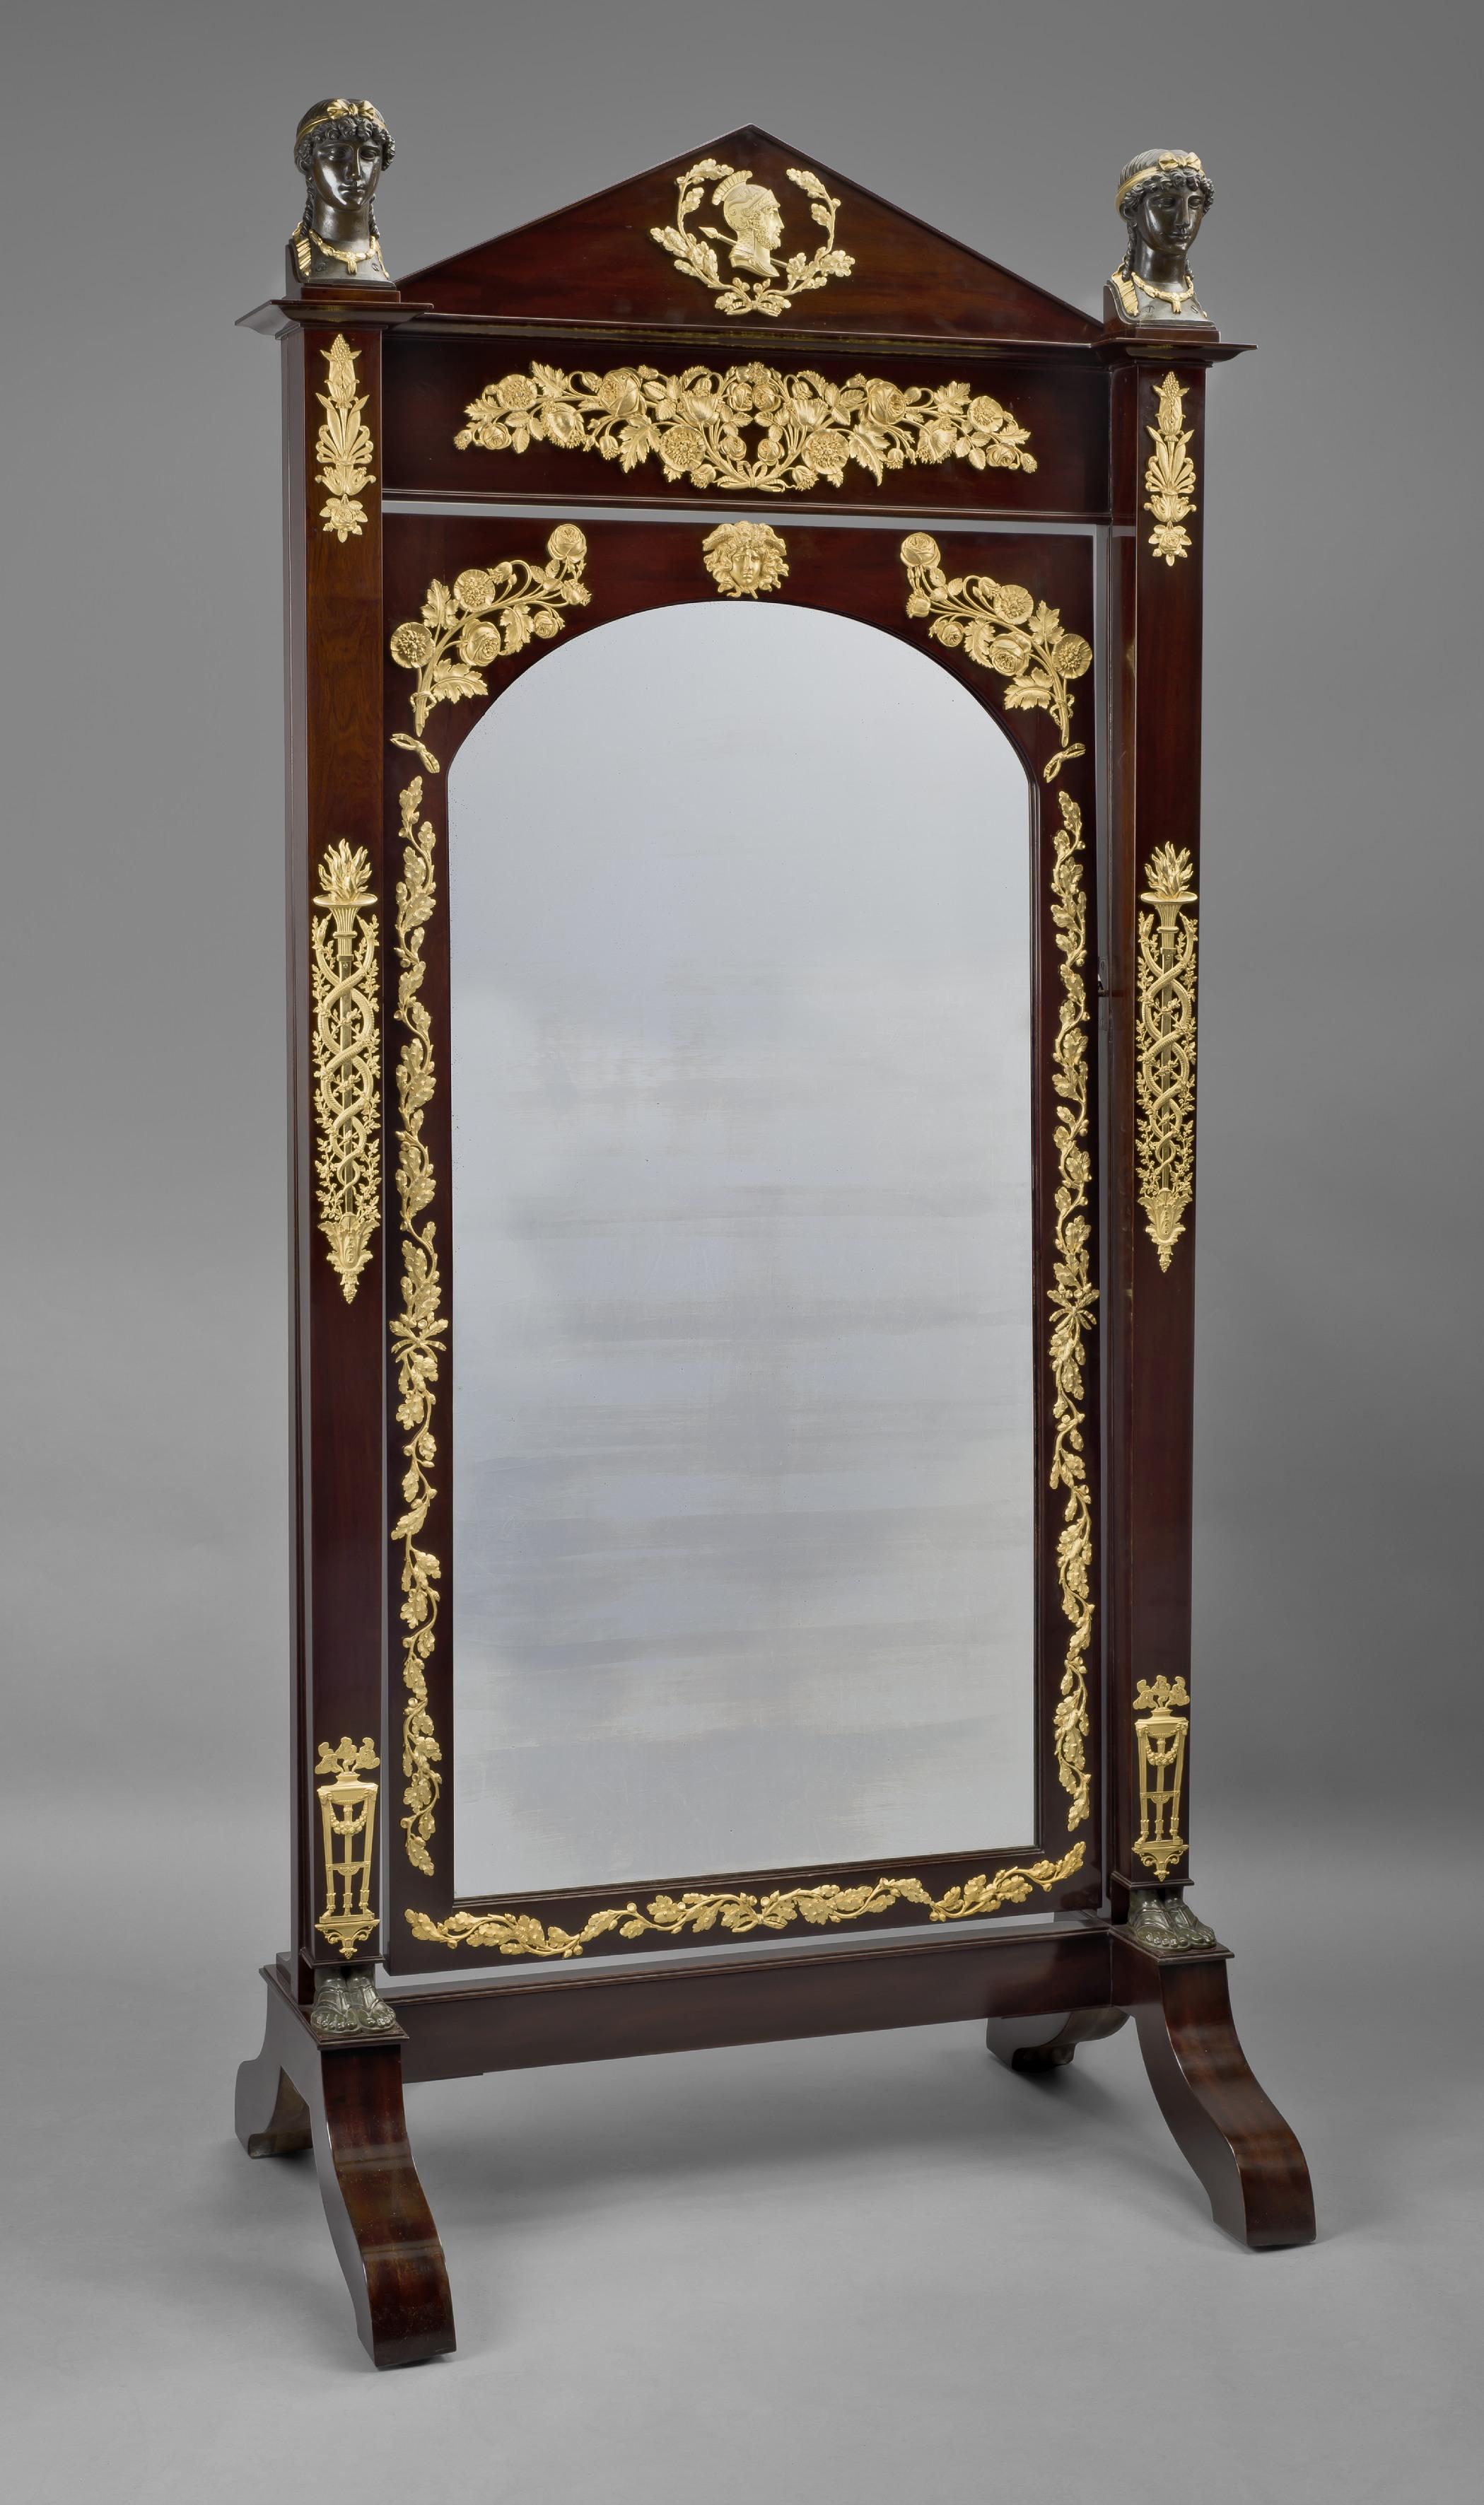 A very fine Empire gilt and patinated bronze mounted mahogany cheval mirror or 'Psyché'. 

French, circa 1820. 

This fine Empire style mahogany cheval mirror or 'Psyché' is of exceptional quality, with finely cast gilt-bronze mounts and